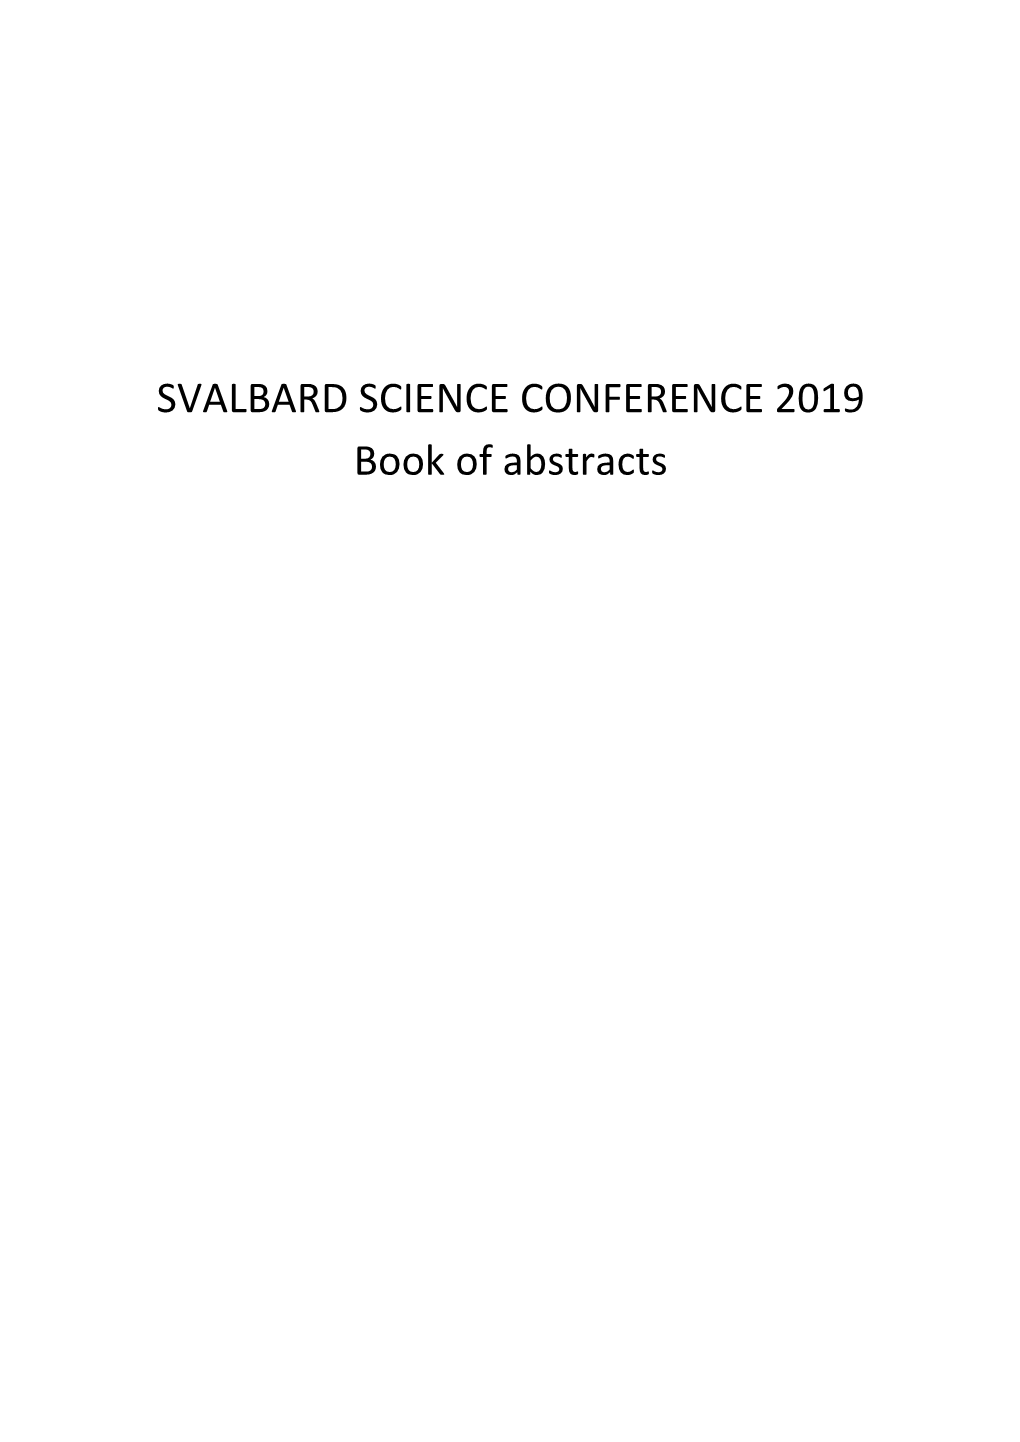 SVALBARD SCIENCE CONFERENCE 2019 Book of Abstracts